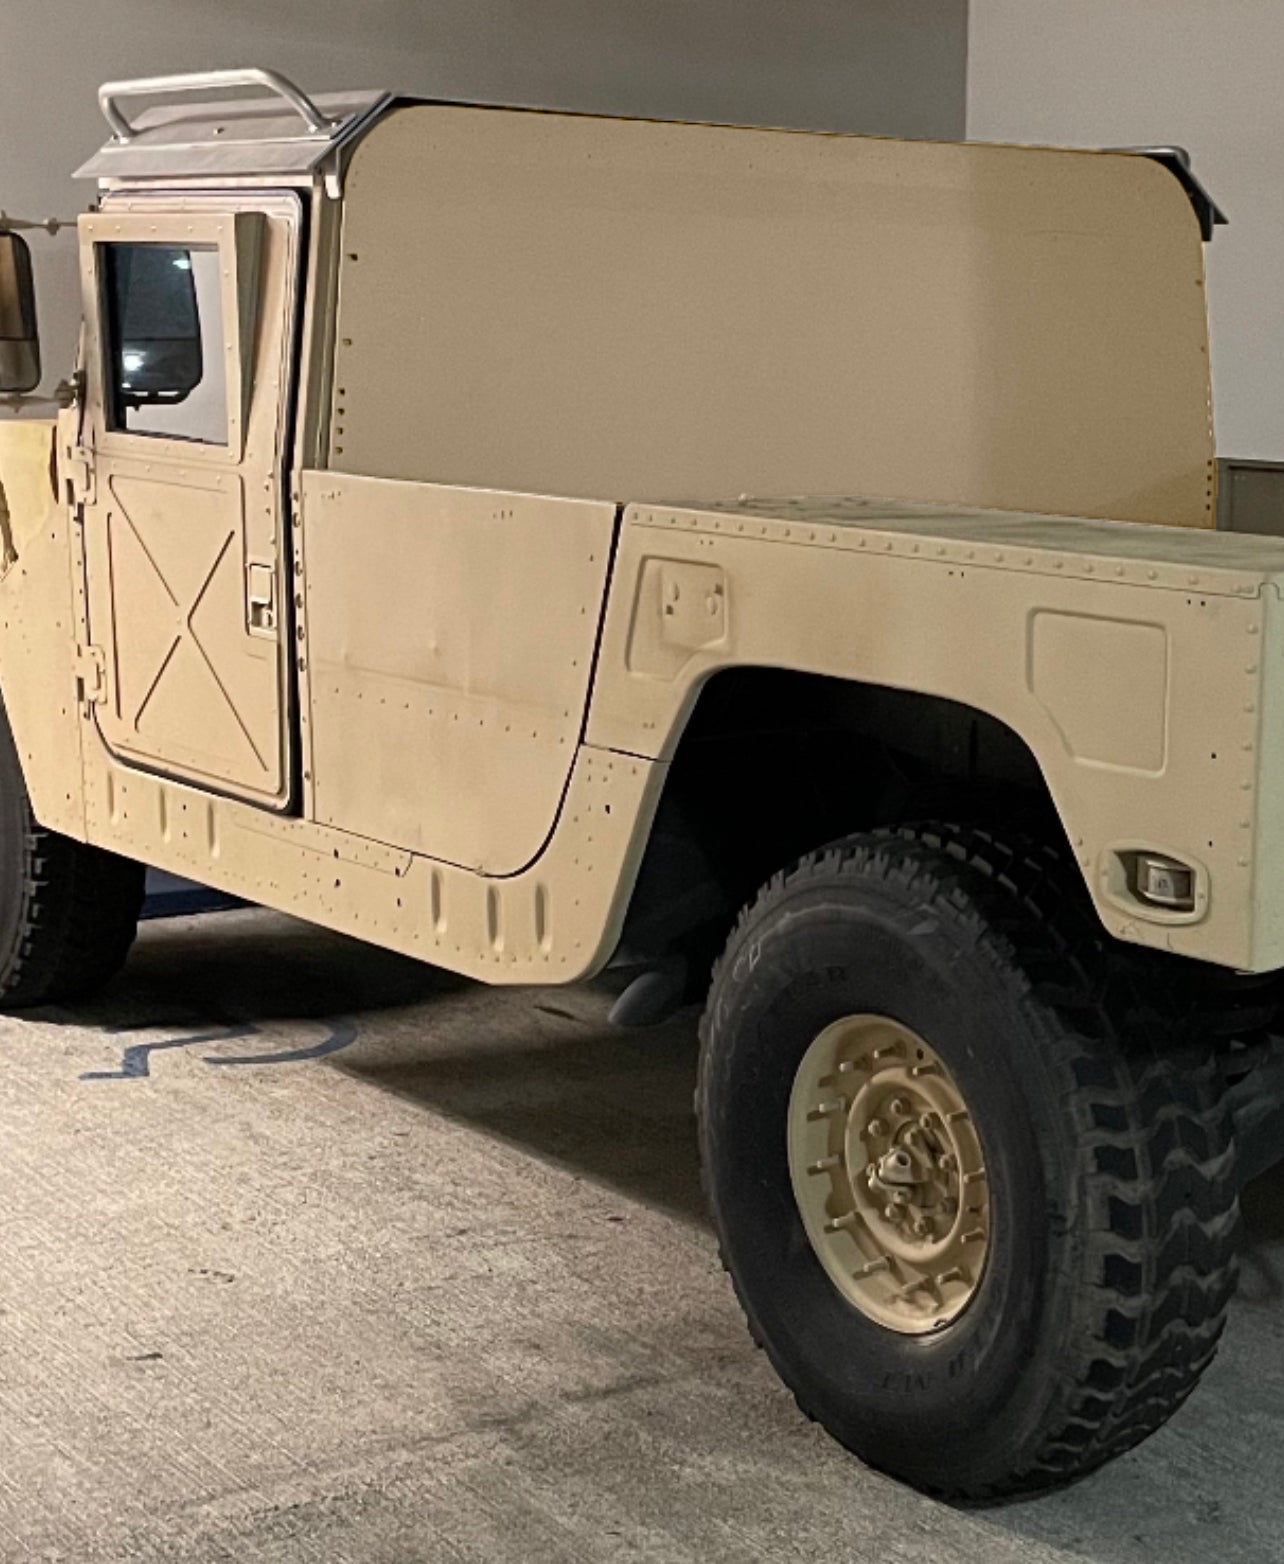 Iron Curtain AC Prep Style - No Window Opening - Used When Installing Air Conditioning in Military HUMVEE HMMWV M998 M1038 M1025